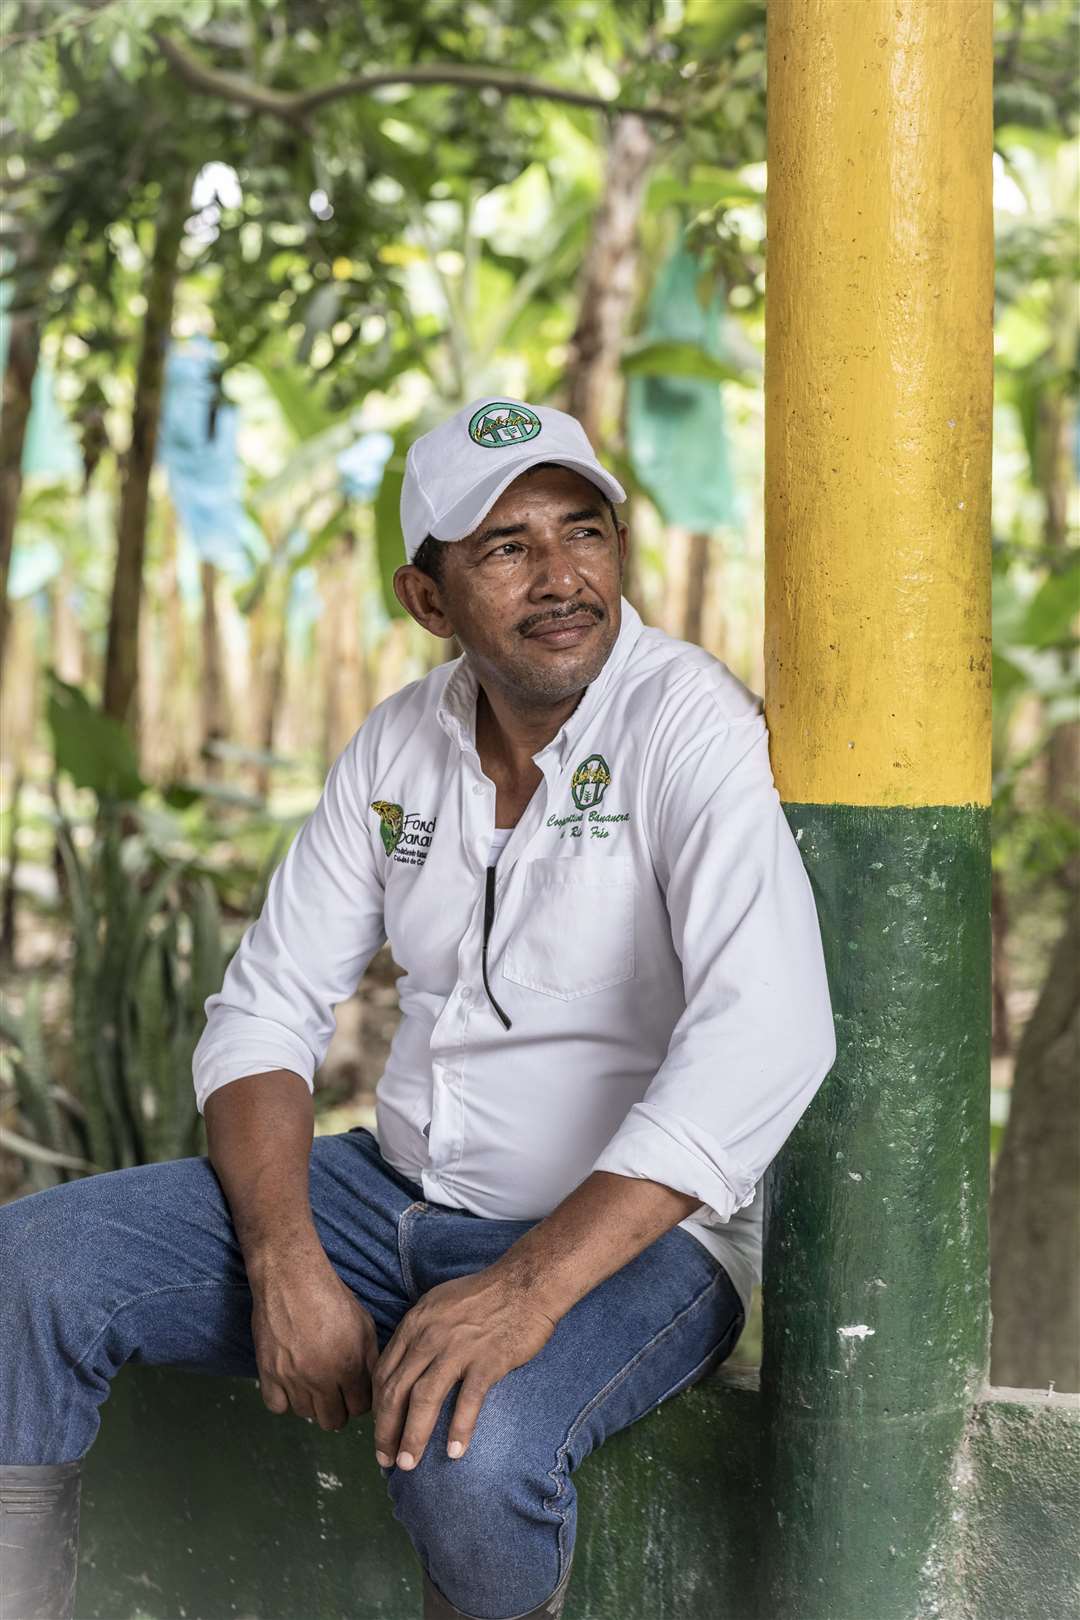 Albeiro Cantillo, also known as Foncho, at his farm near Orihueca, Magdalena, Colombia in February (Chris Terry/PA)